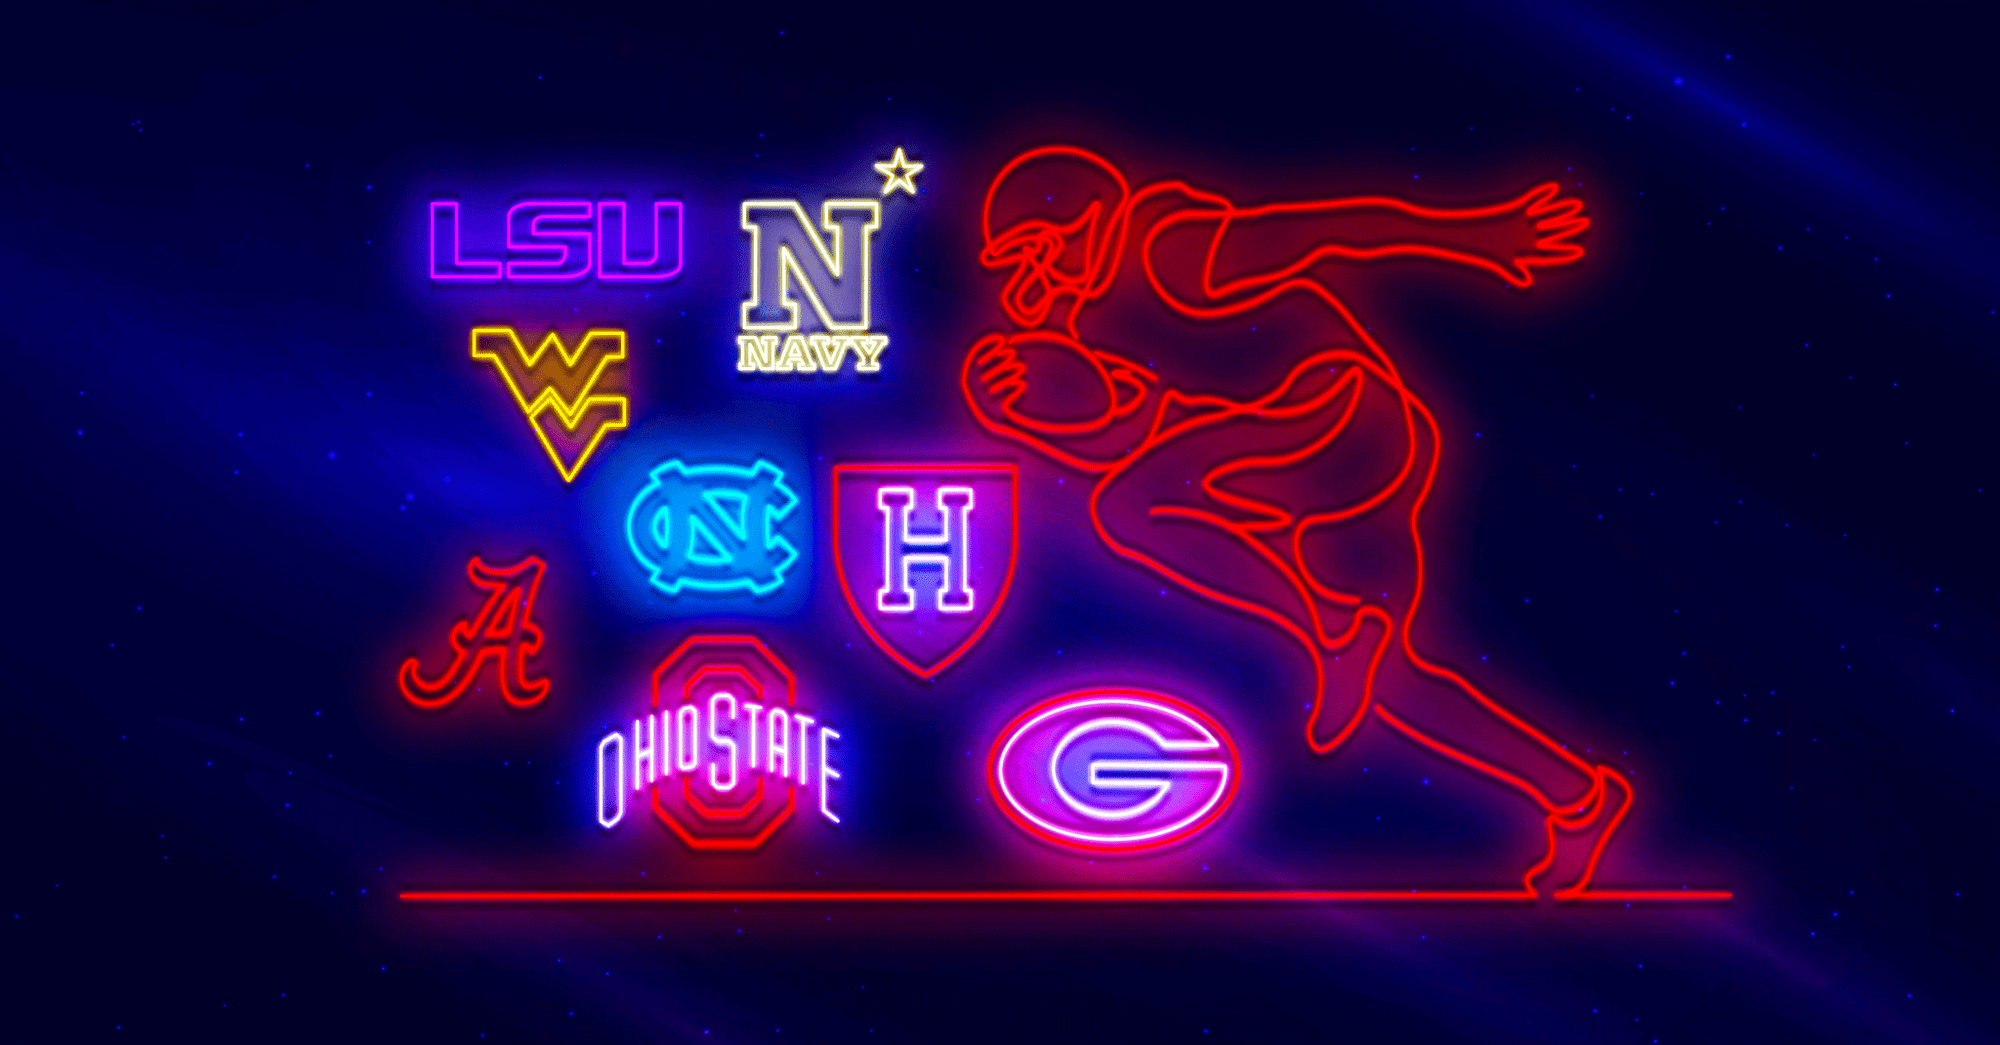 [New] College Football Neon Signs. Just in time for the season.